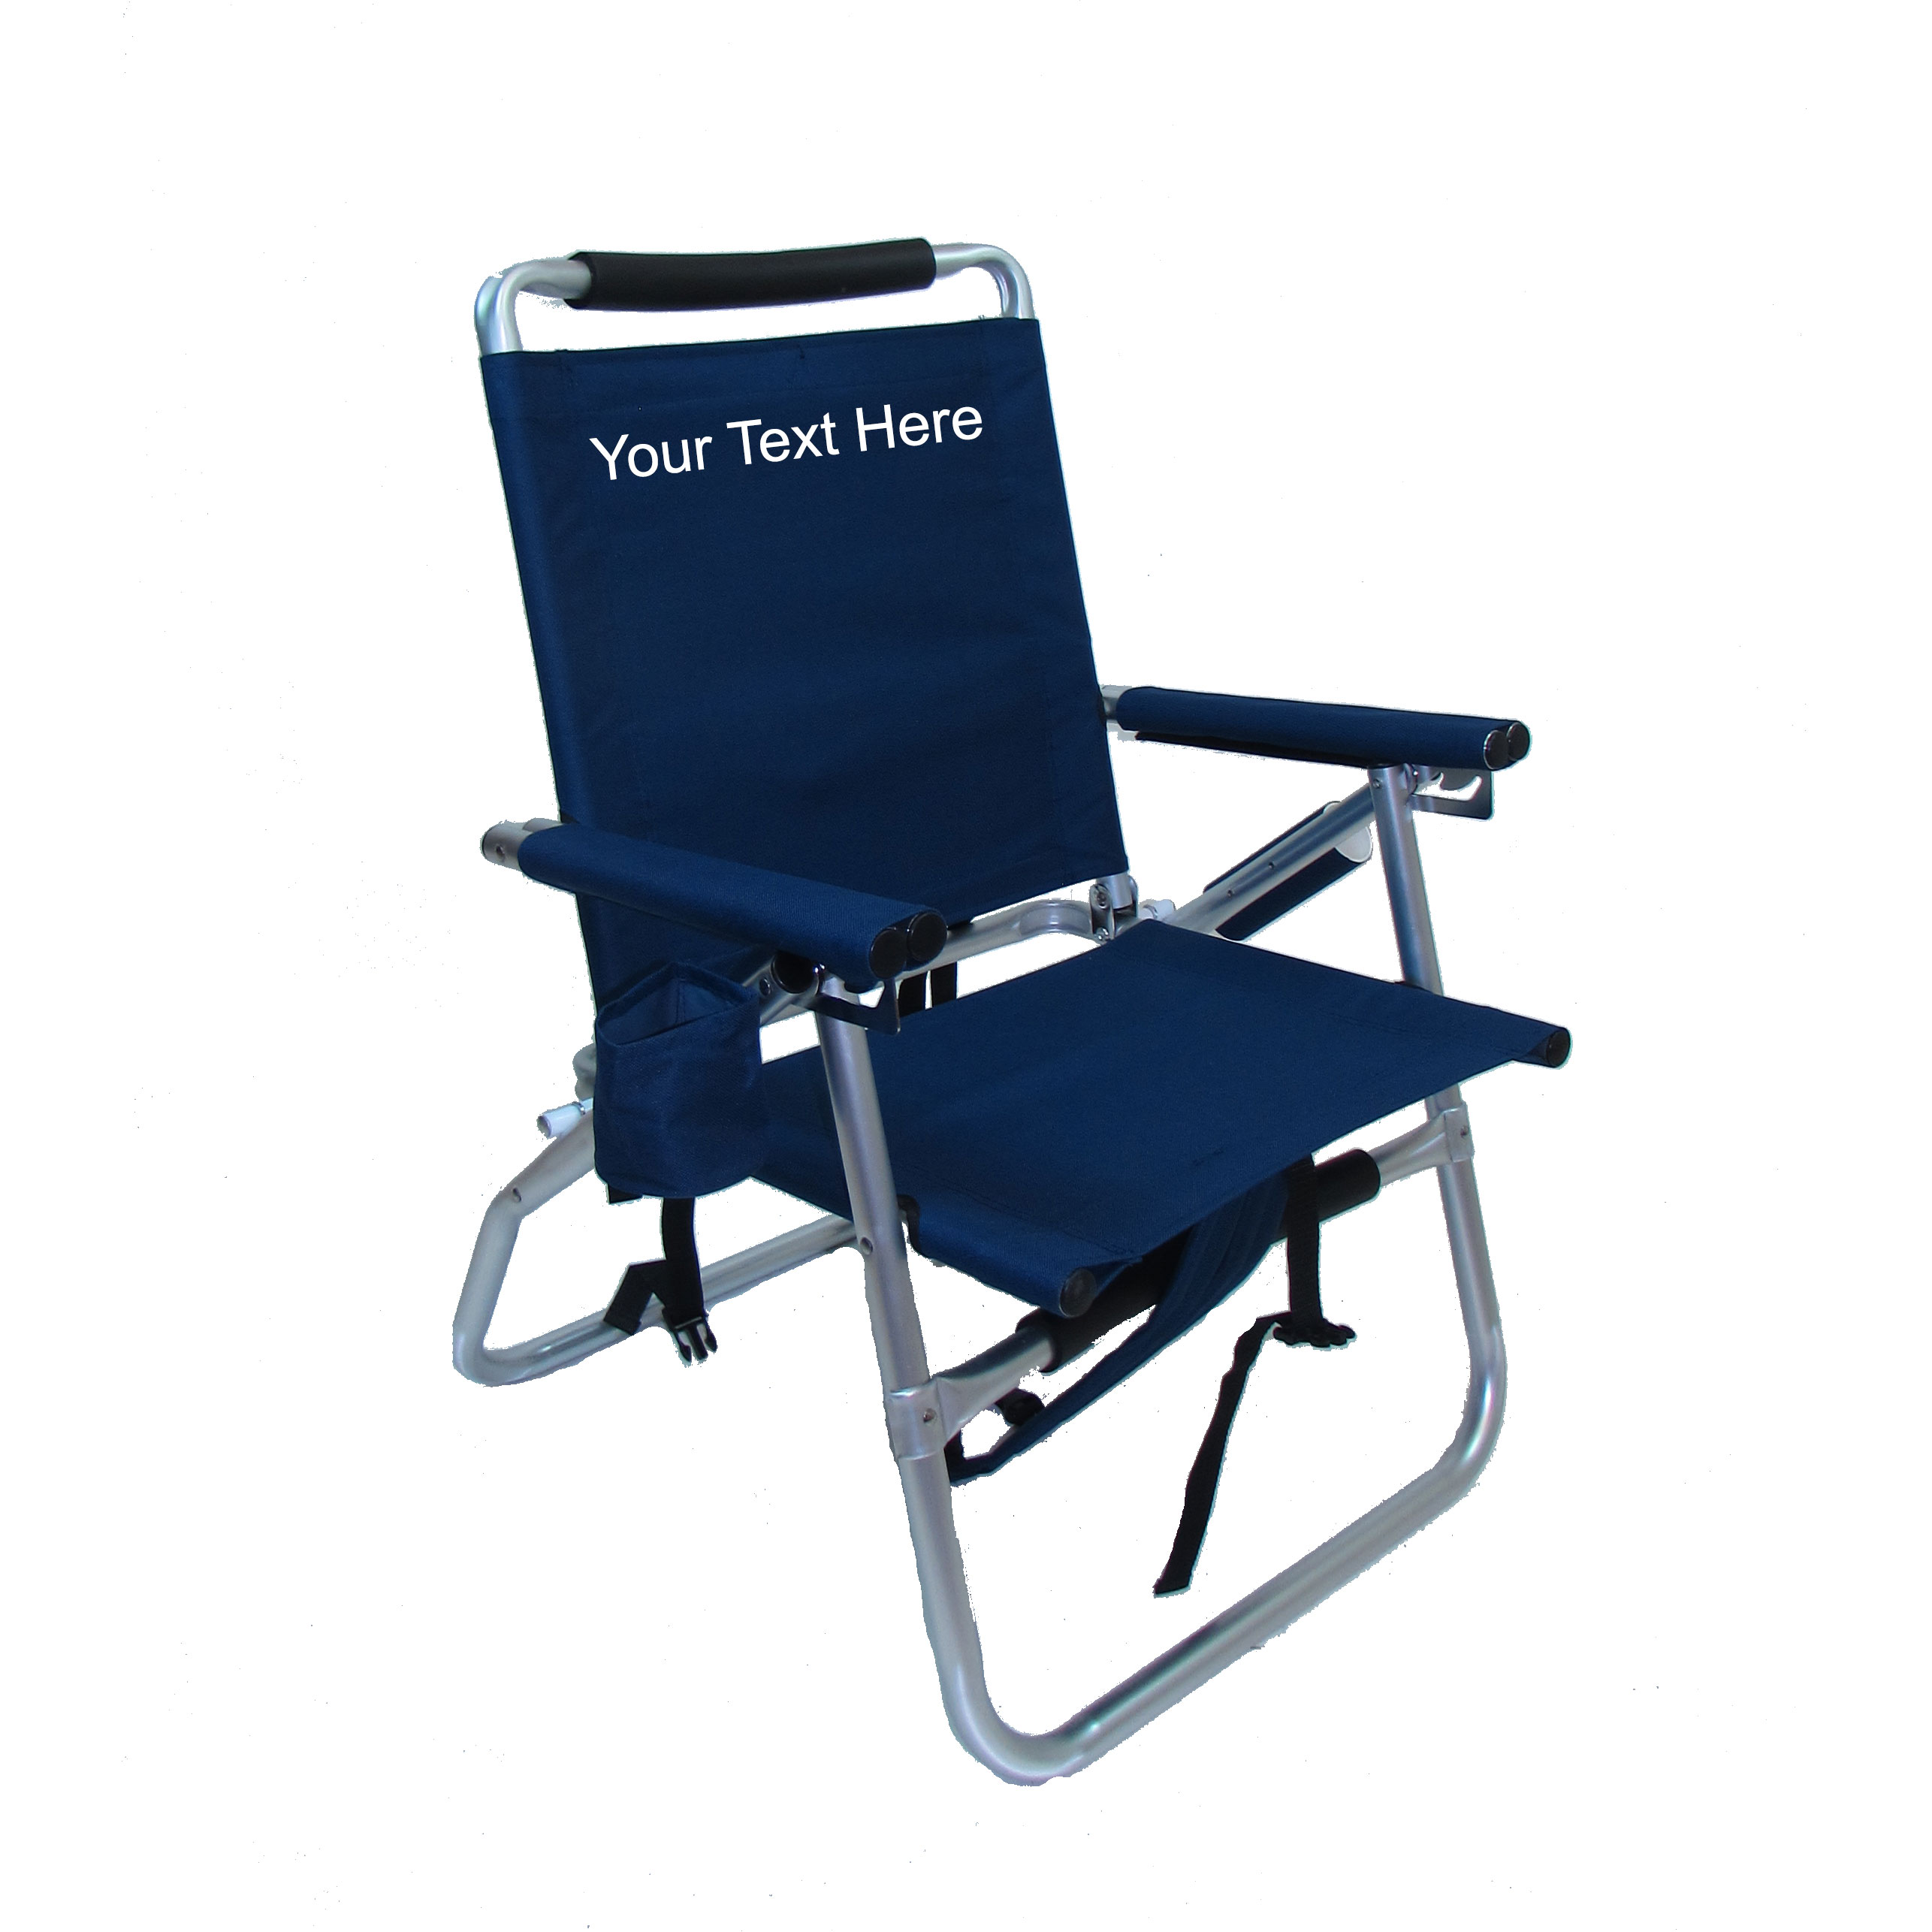 IMPRINTED Backpack Fishing Chair with Cup and Rod Holder - Custom